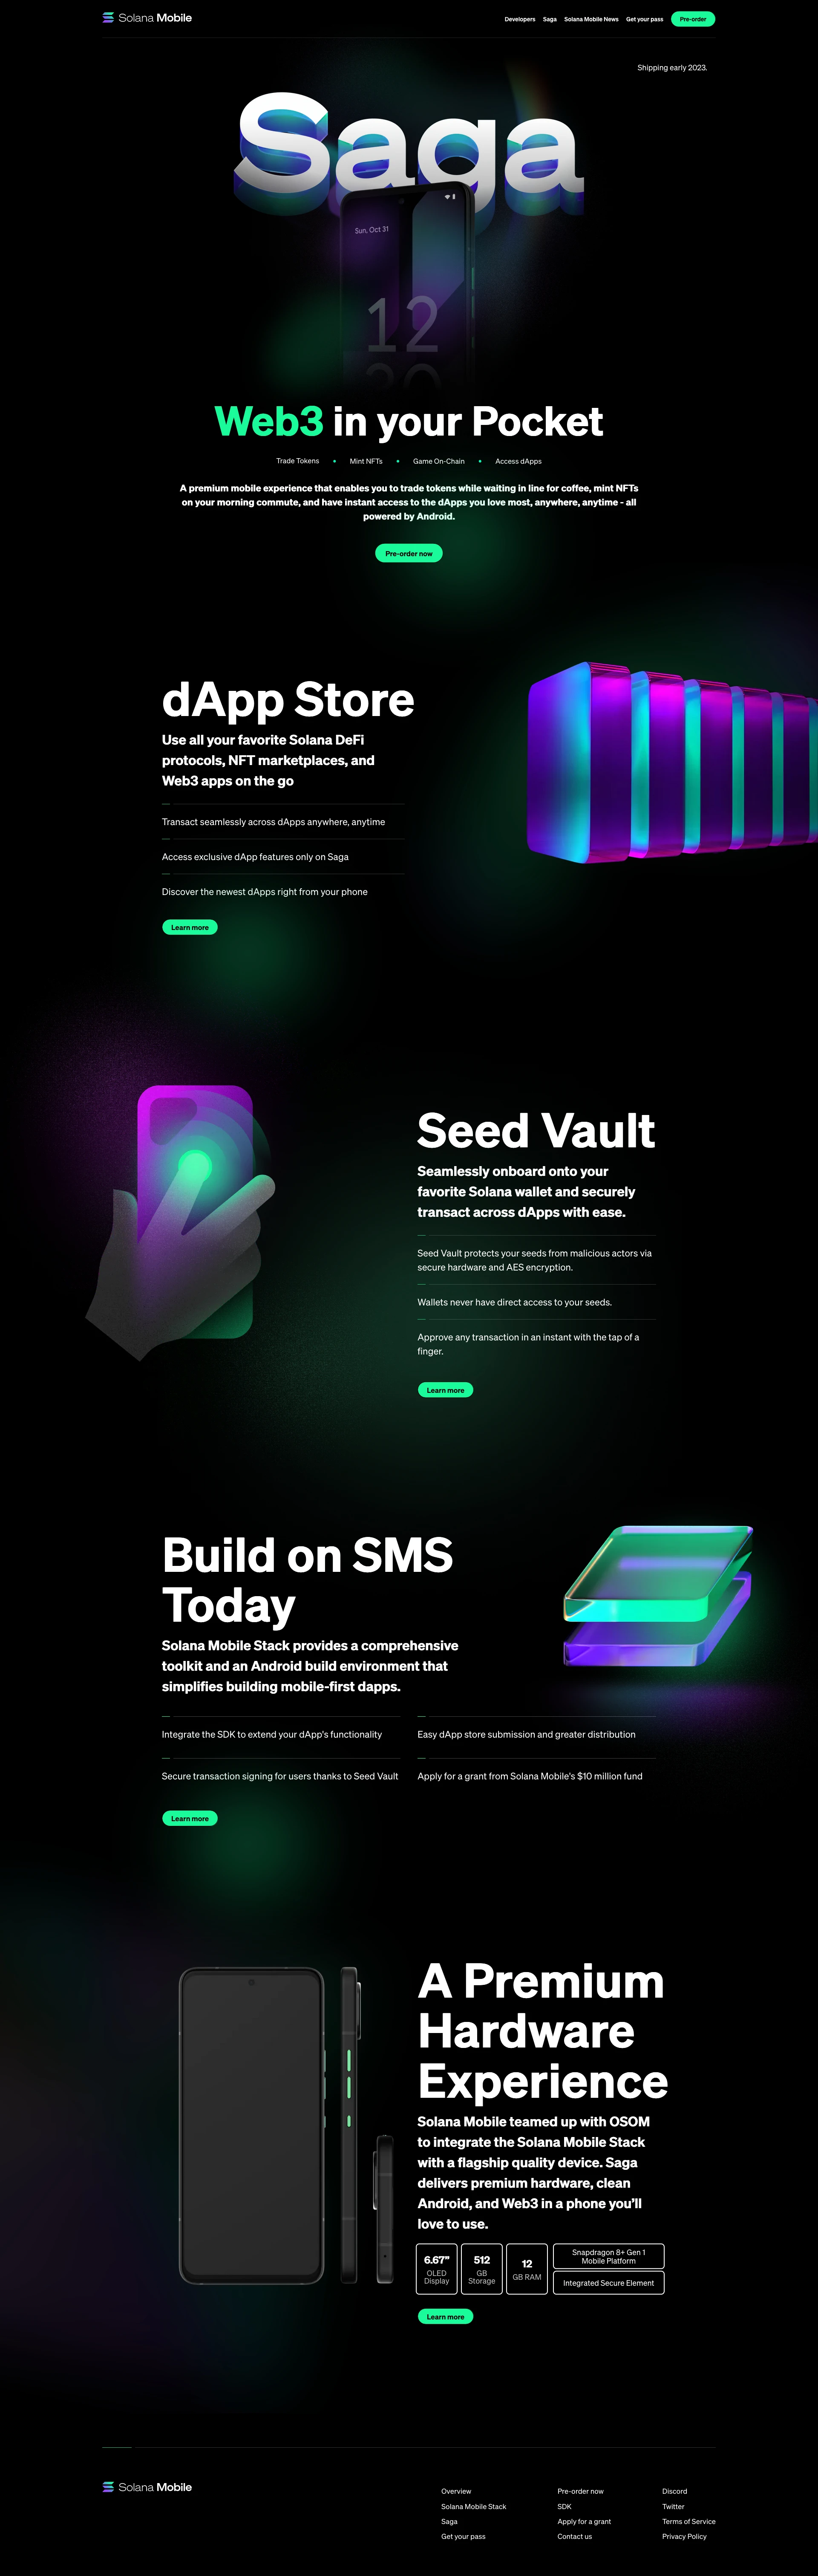 Solana Mobile Landing Page Example: A premium mobile experience that enables you to trade tokens while waiting in line for coffee, mint NFTs on your morning commute, and have instant access to the dApps you love most, anywhere, anytime - all powered by Android.